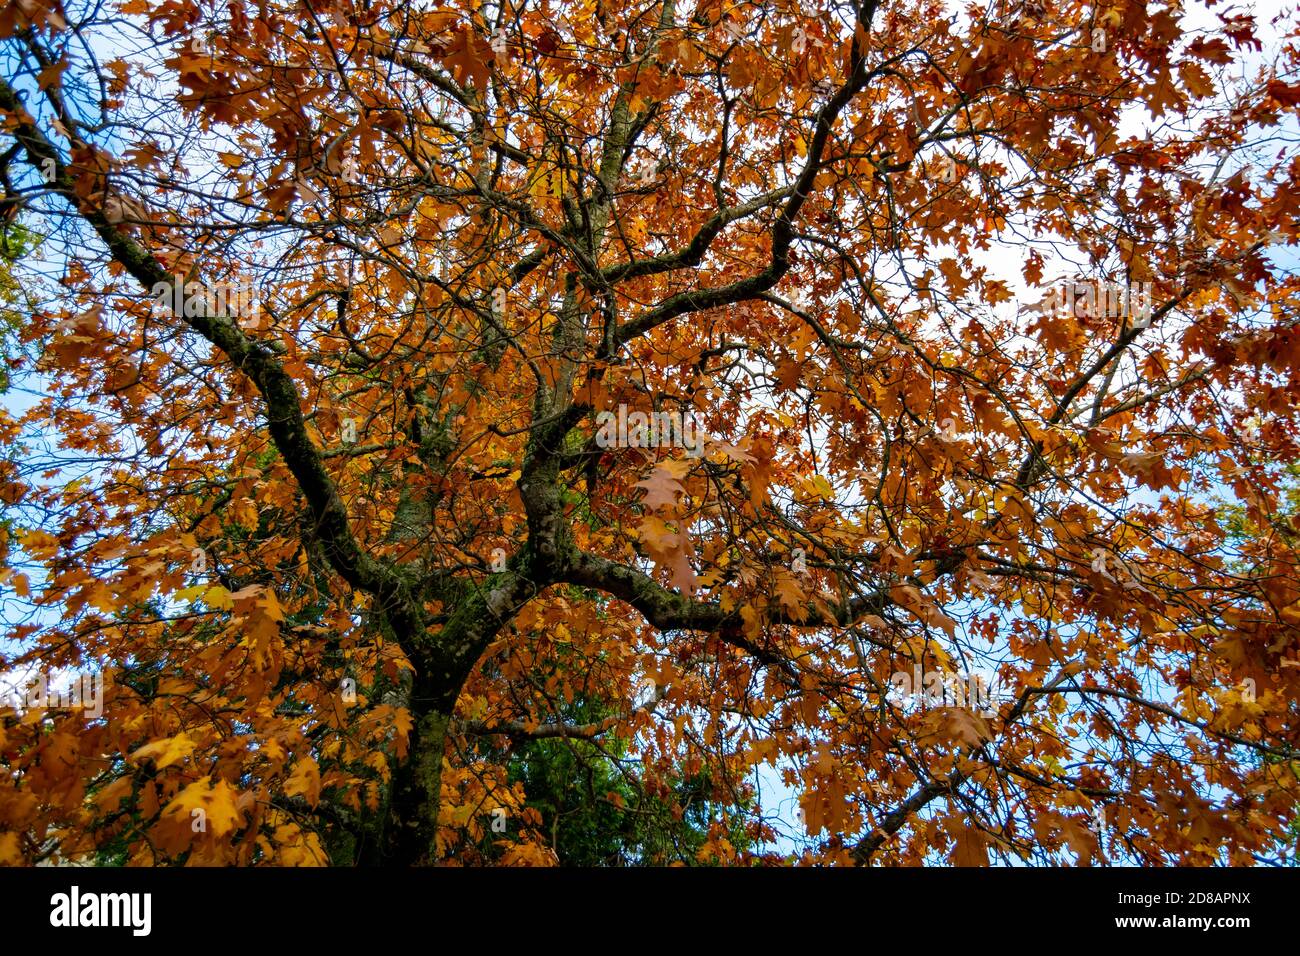 Autumn colorful tree with brownish leaves, Quercus Frainetto Stock Photo